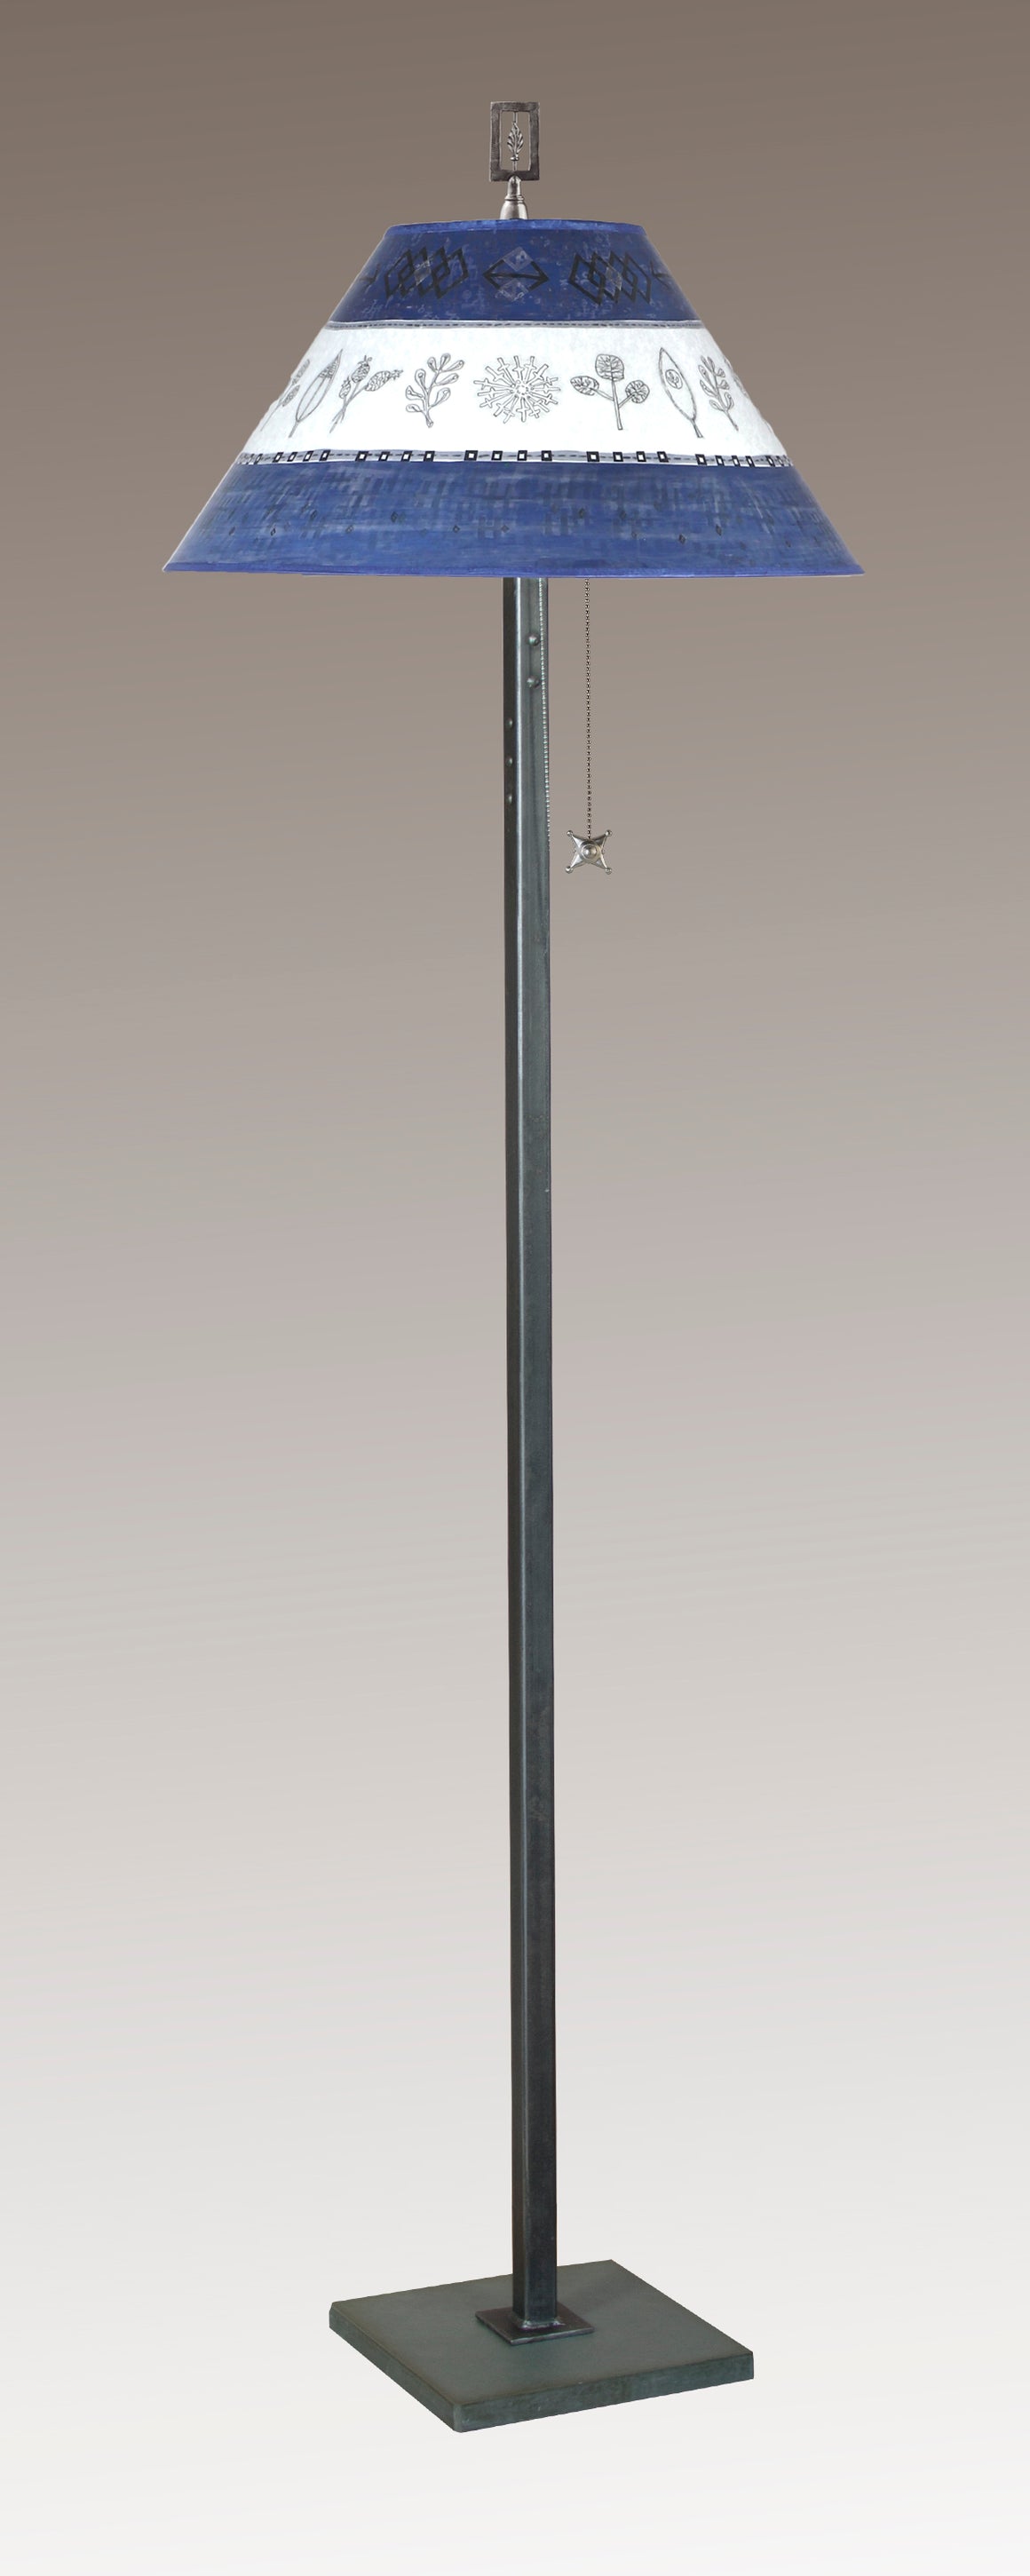 Steel Floor Lamp with Large Conical Shade in Woven Sprig & Sapphire